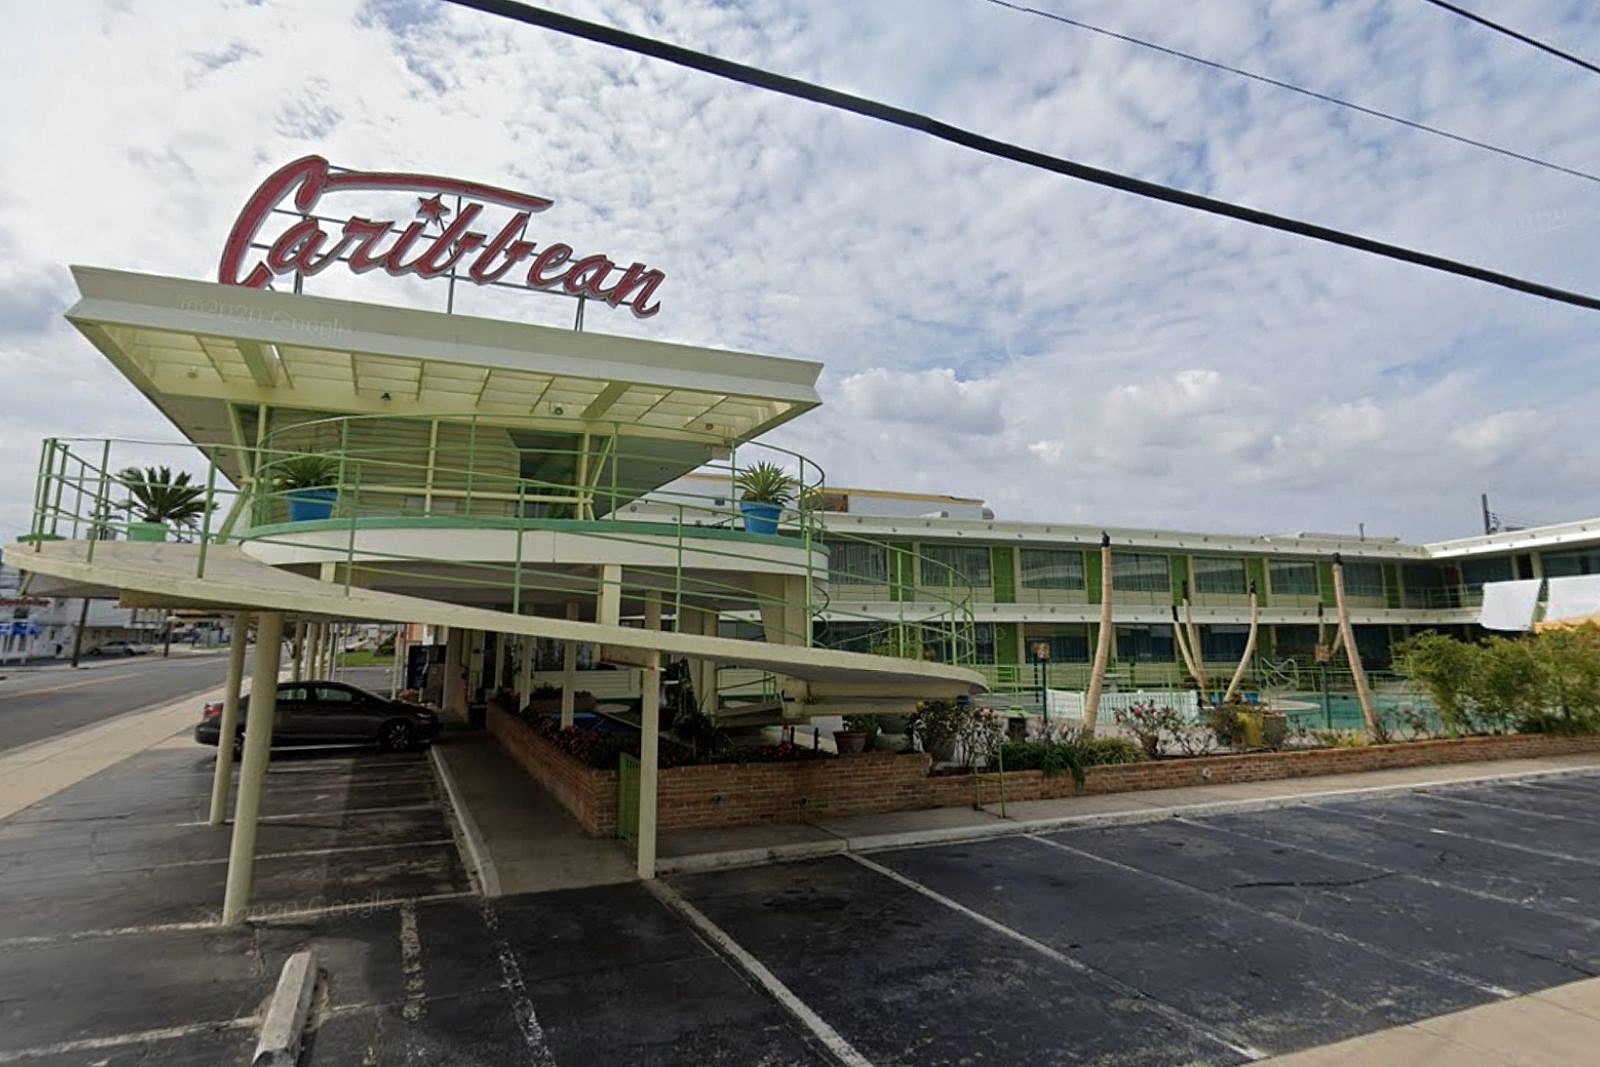 Wildwood motels through the years: Rise and fall of Doo Wop